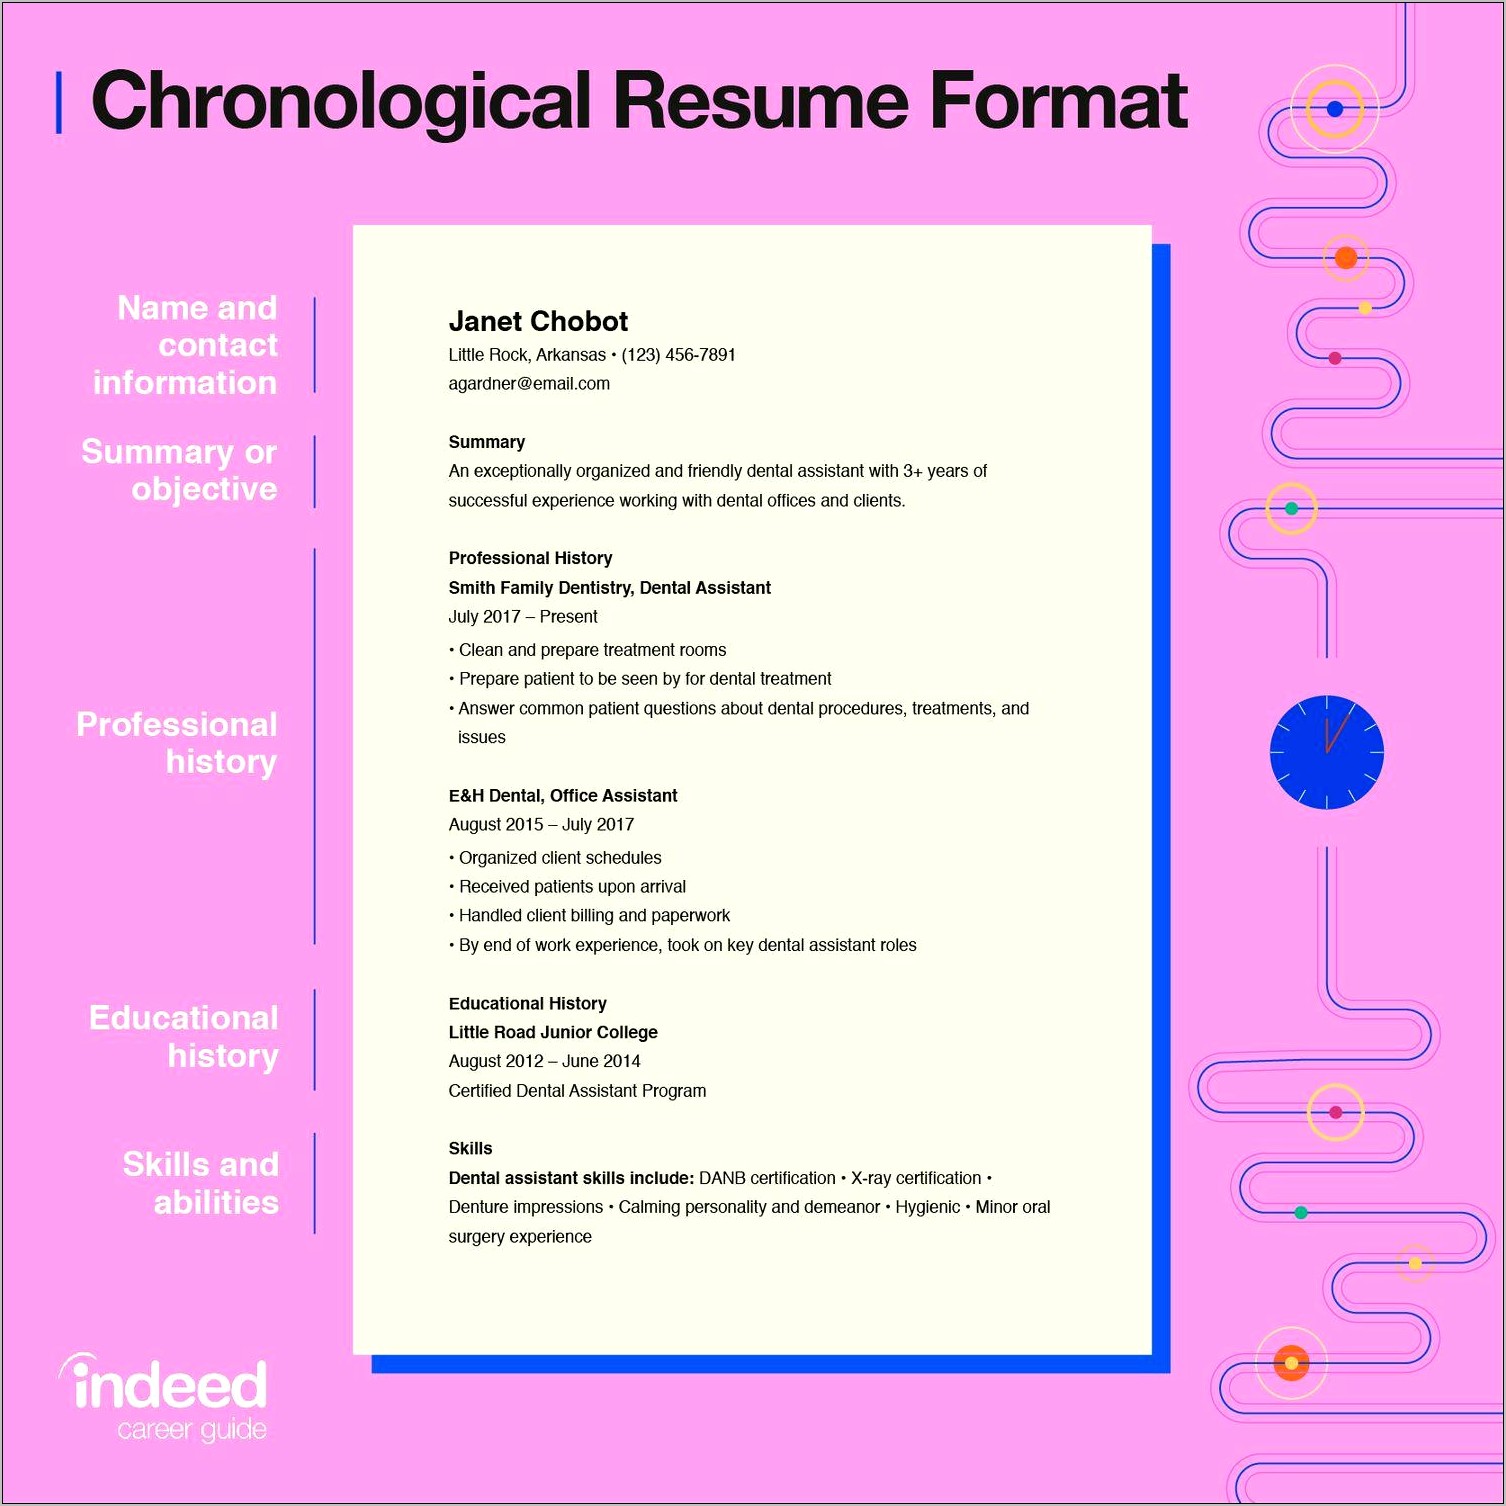 Sample Resume With Unrelated Experience